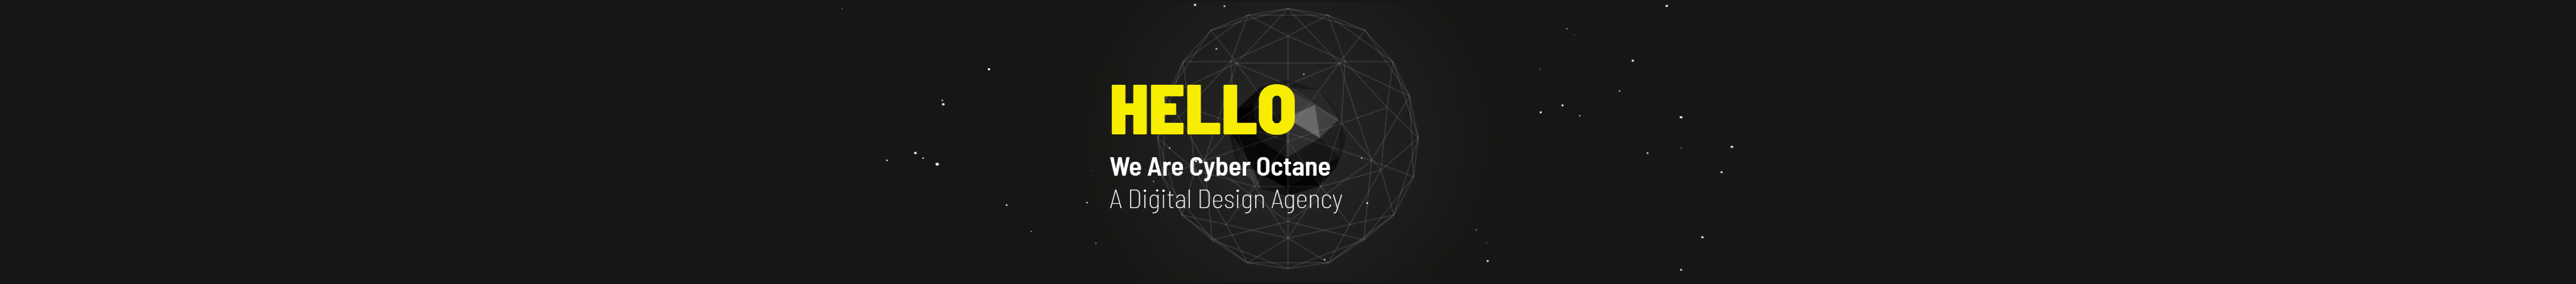 Cyber Octane Interactive's profile banner